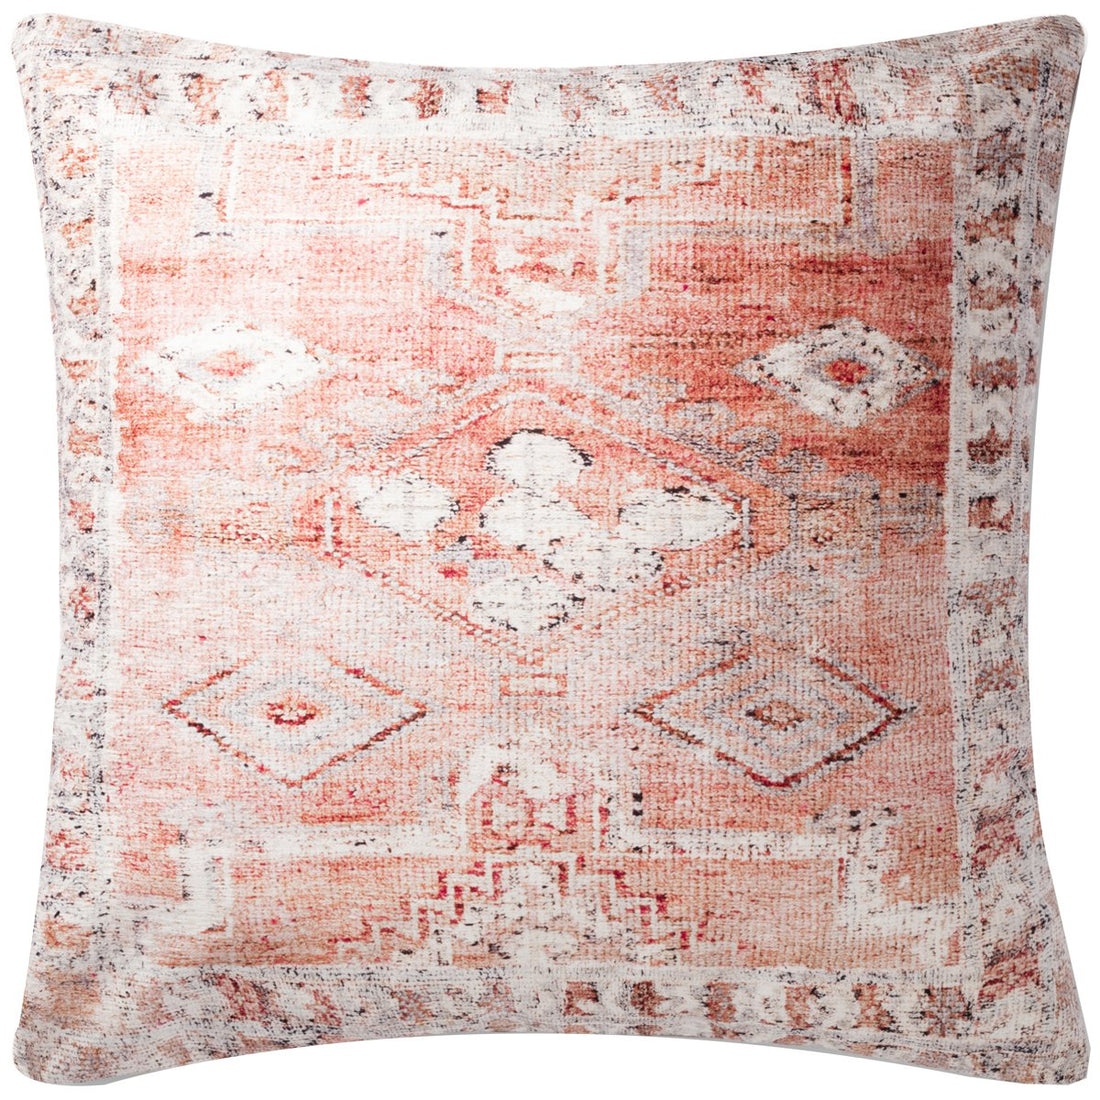 Loloi P0886 Coral and Multi 3' x 3' Floor Pillow, Set of 2